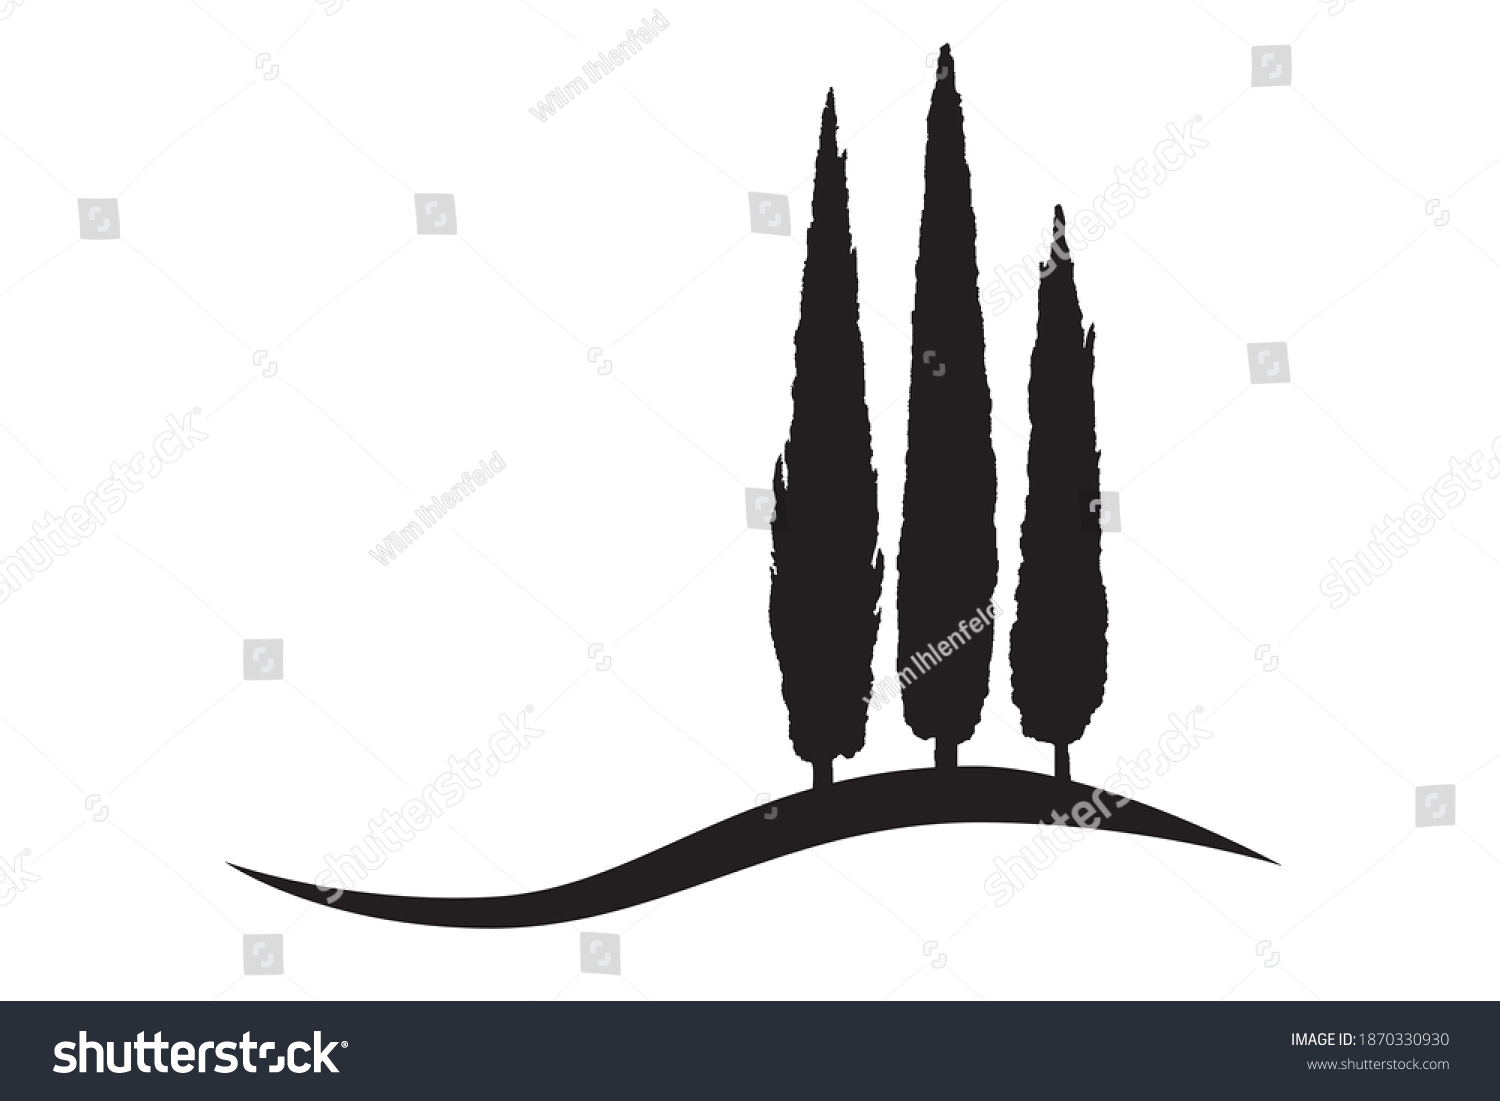 SVG of three isolated vector cypress tree icons on a hill svg